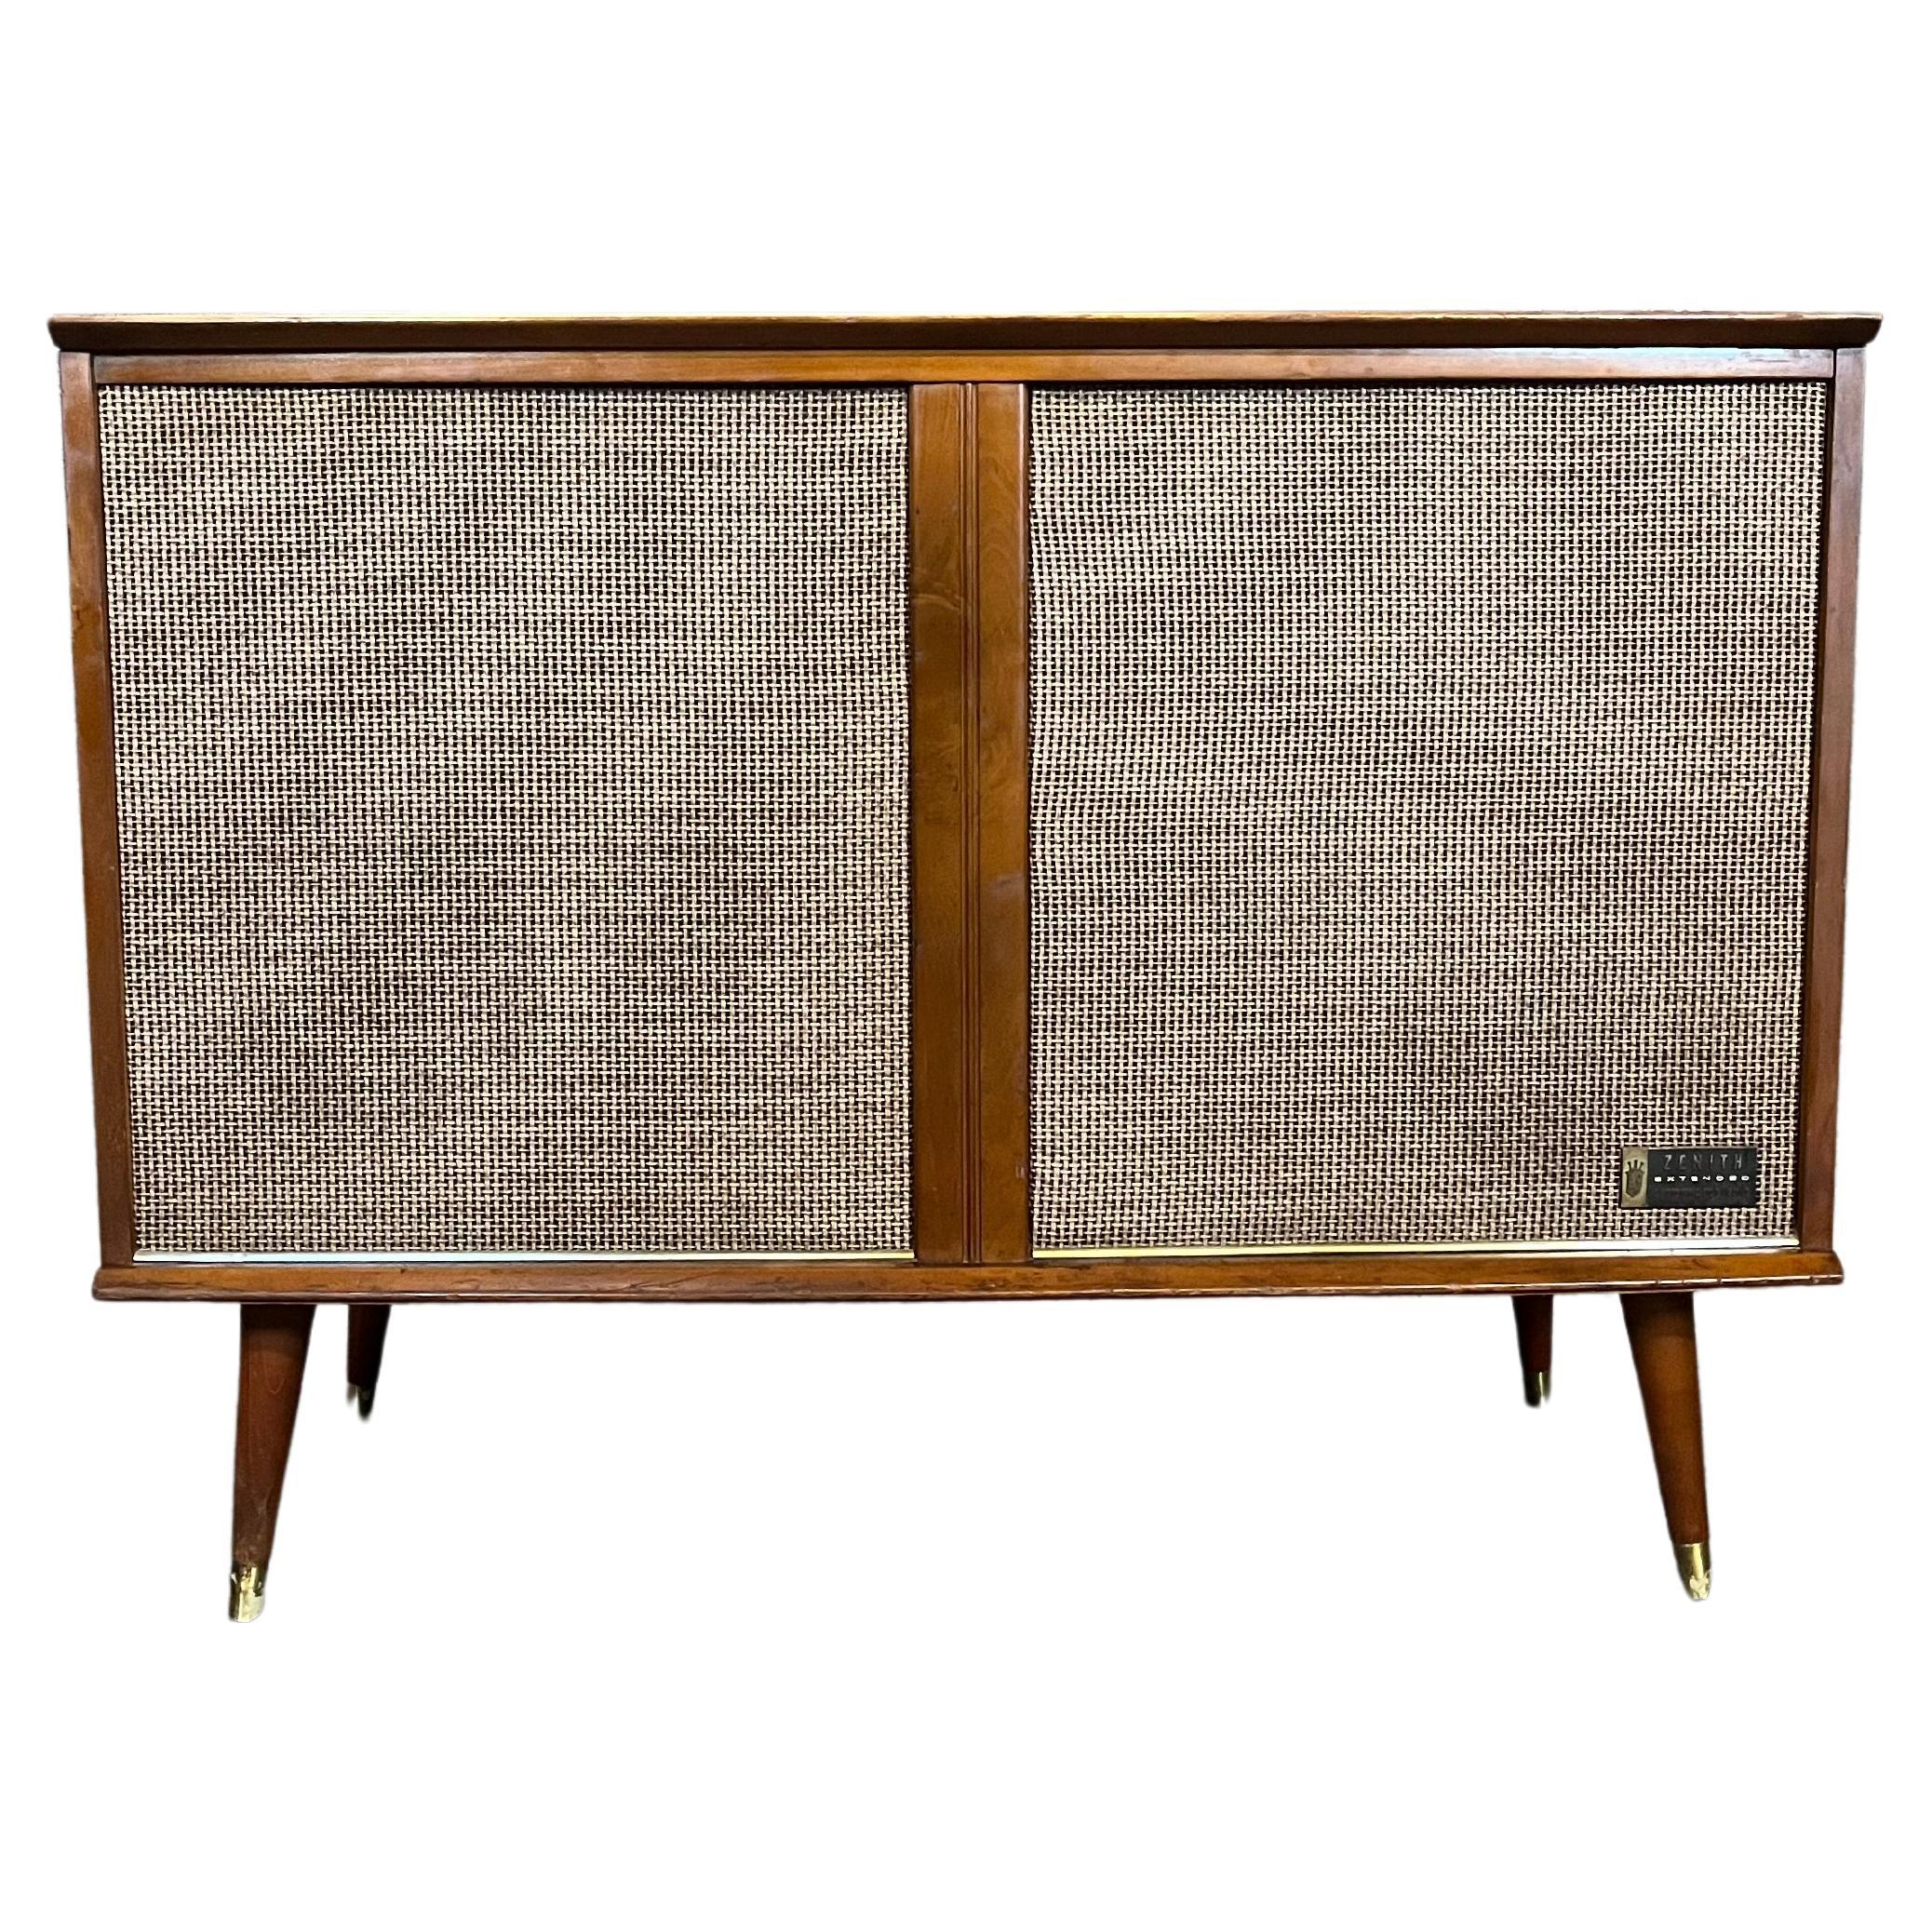 Vintage Mid Century Zenith Stereo Console/Record Player For Sale